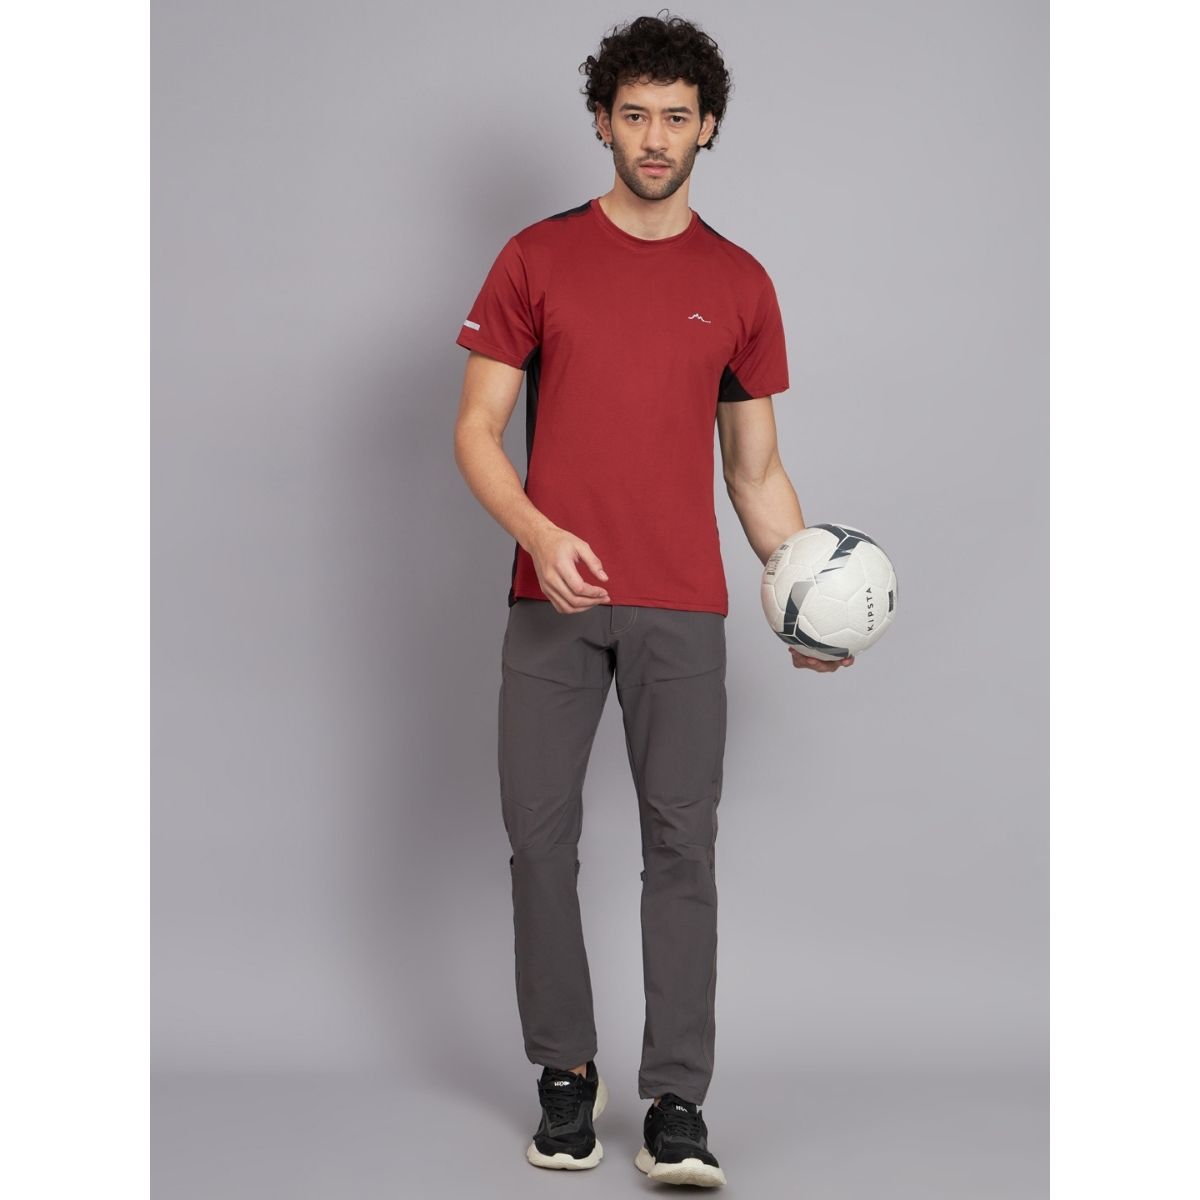 Men's Ultralight Athletic Half Sleeves T-Shirt - Canyon Red 3